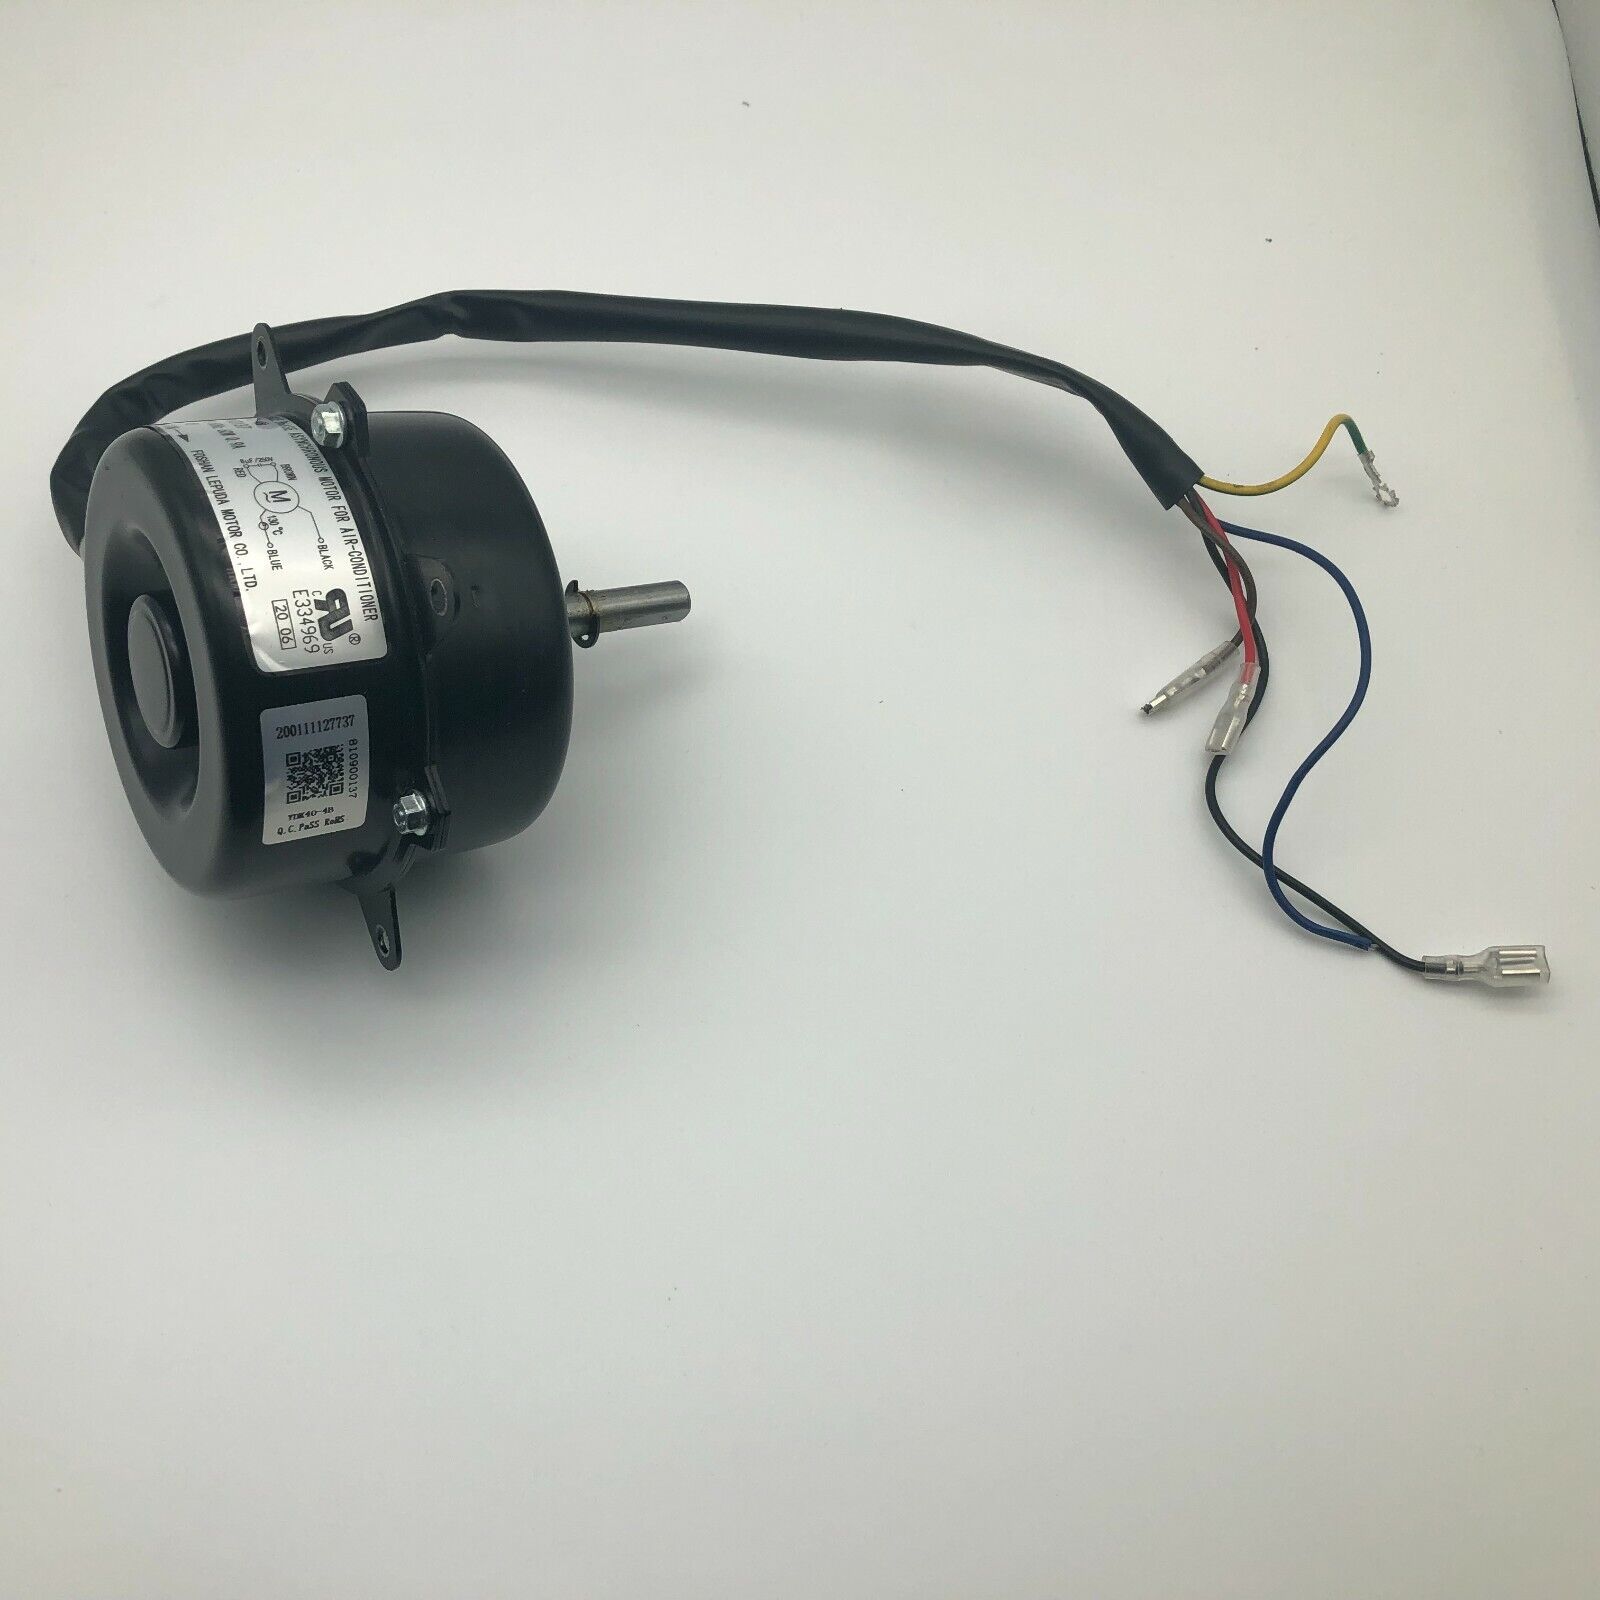 Replacement Blower Fan Motor Indefinitely Max 41% OFF Black Portable Condit Air Decker AC